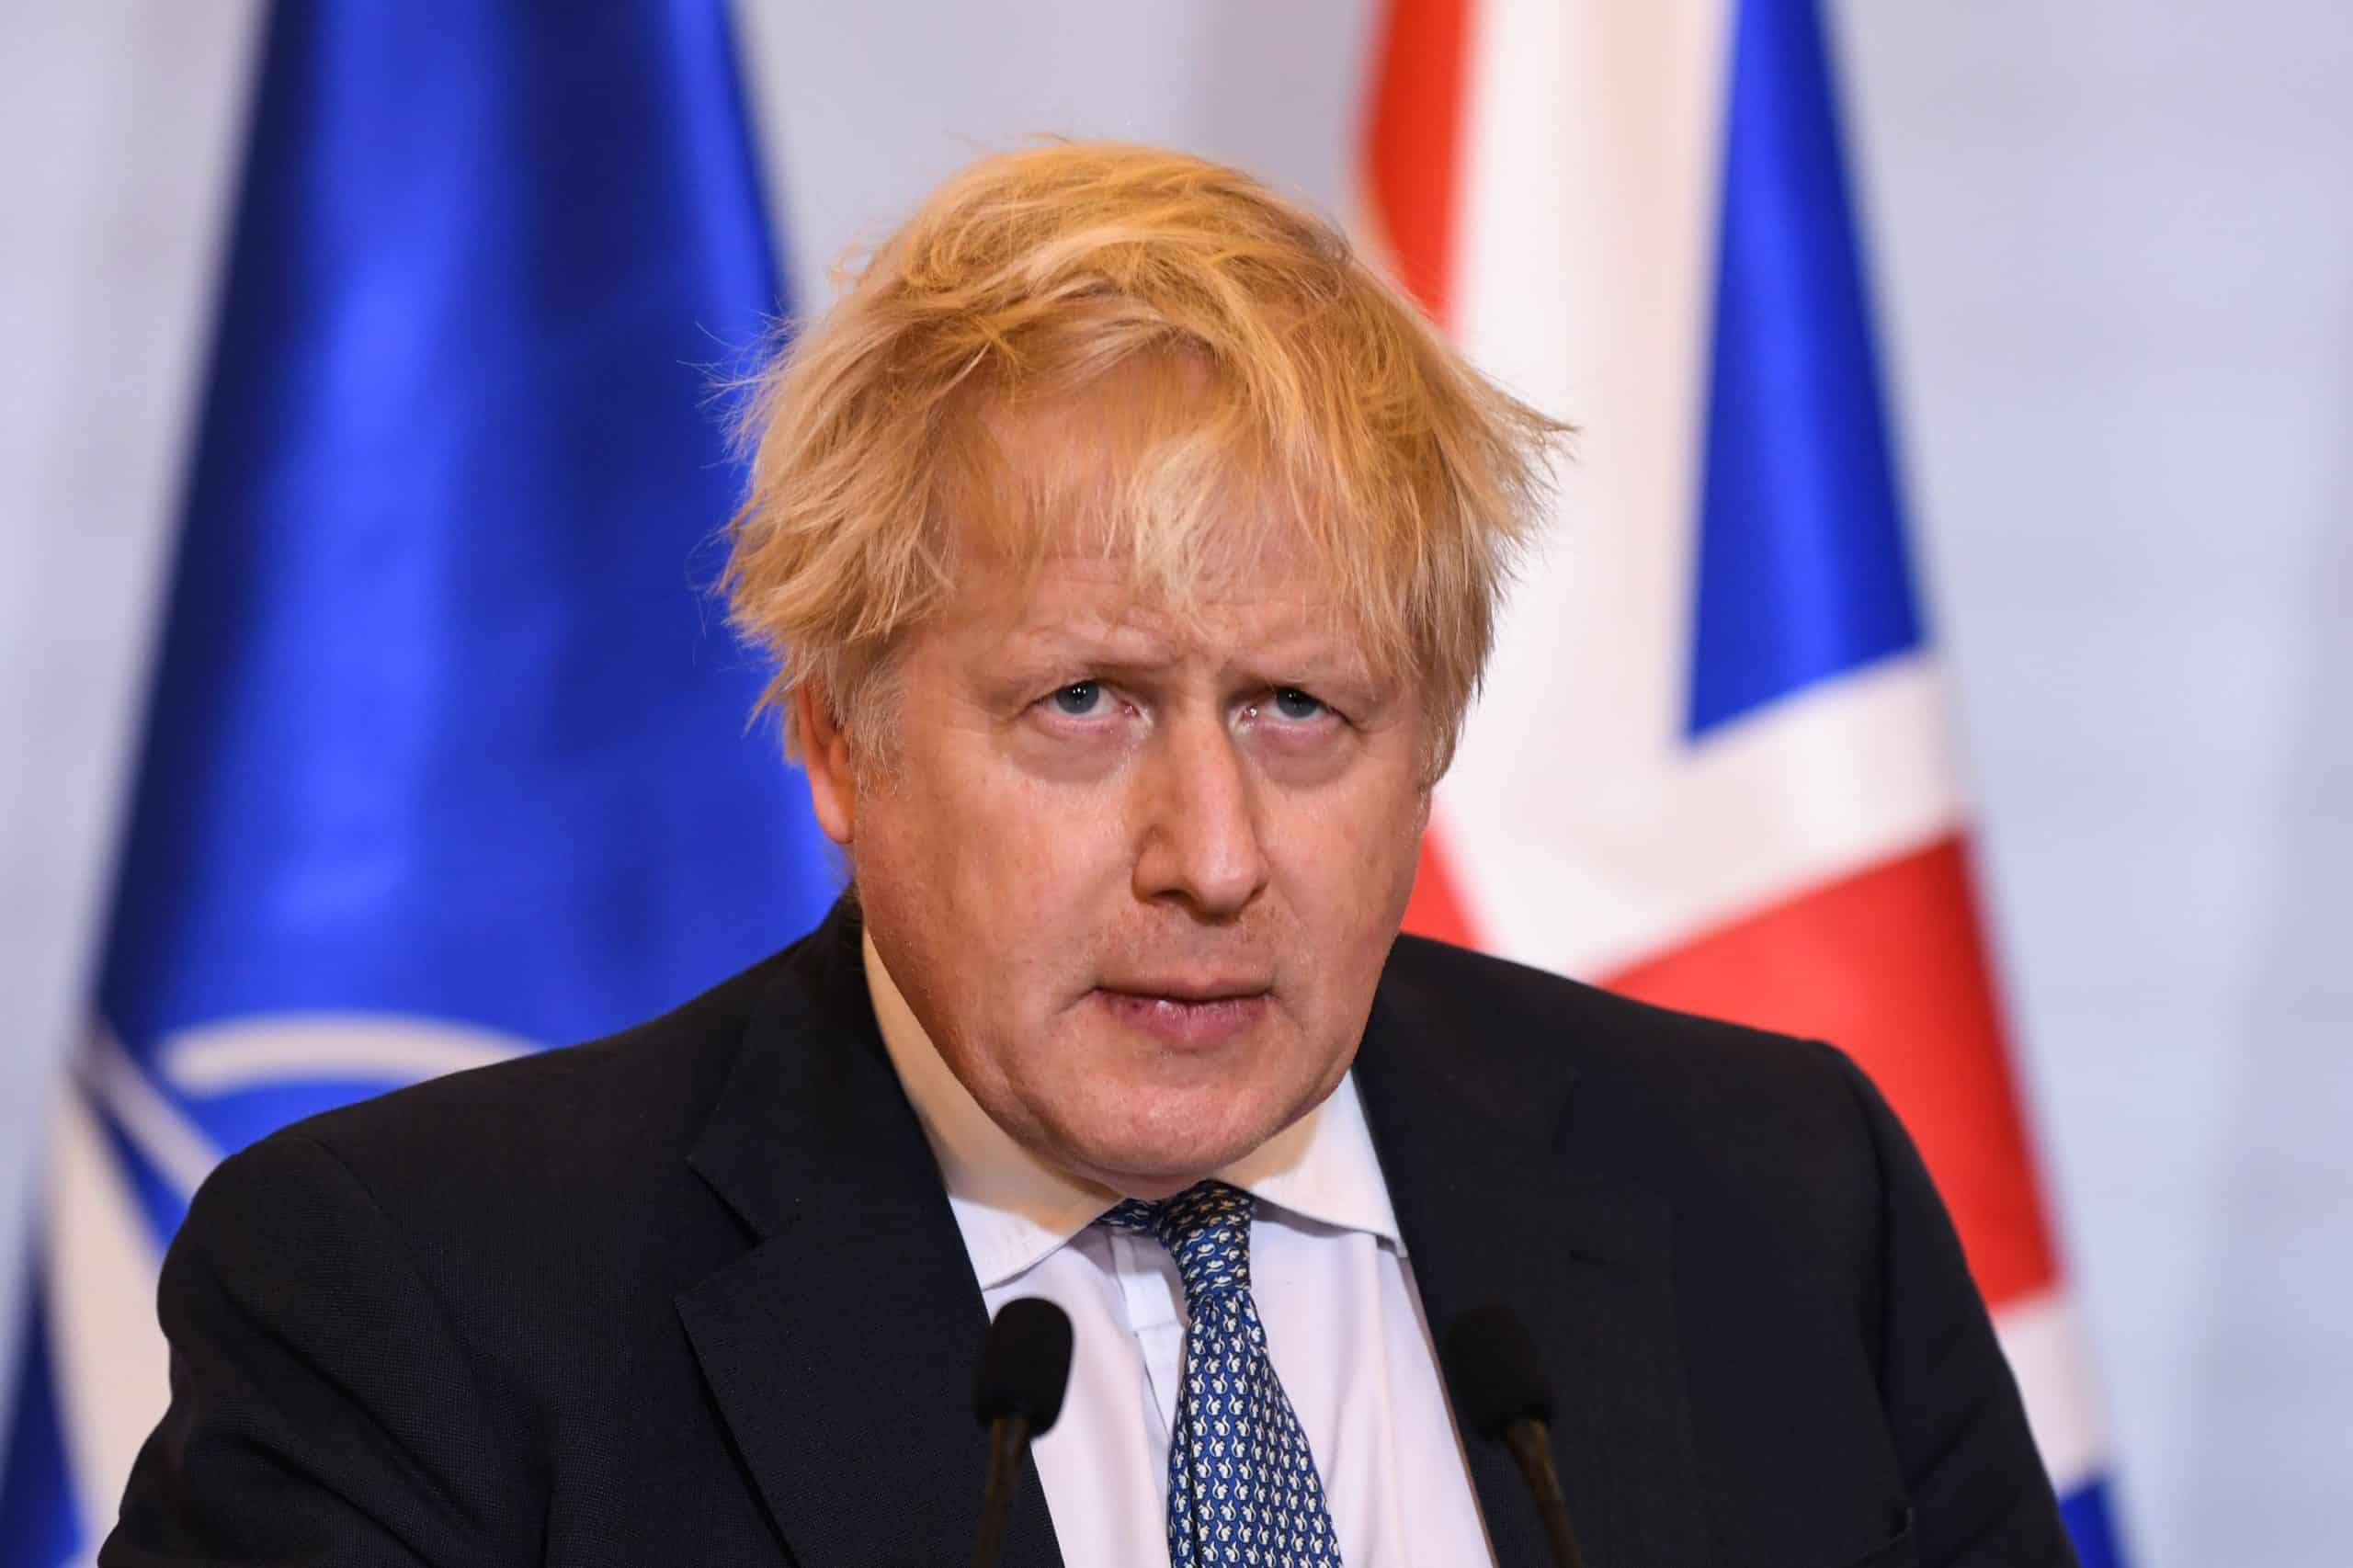 Boris to hire private lawyer as he prepares for Partygate investigation